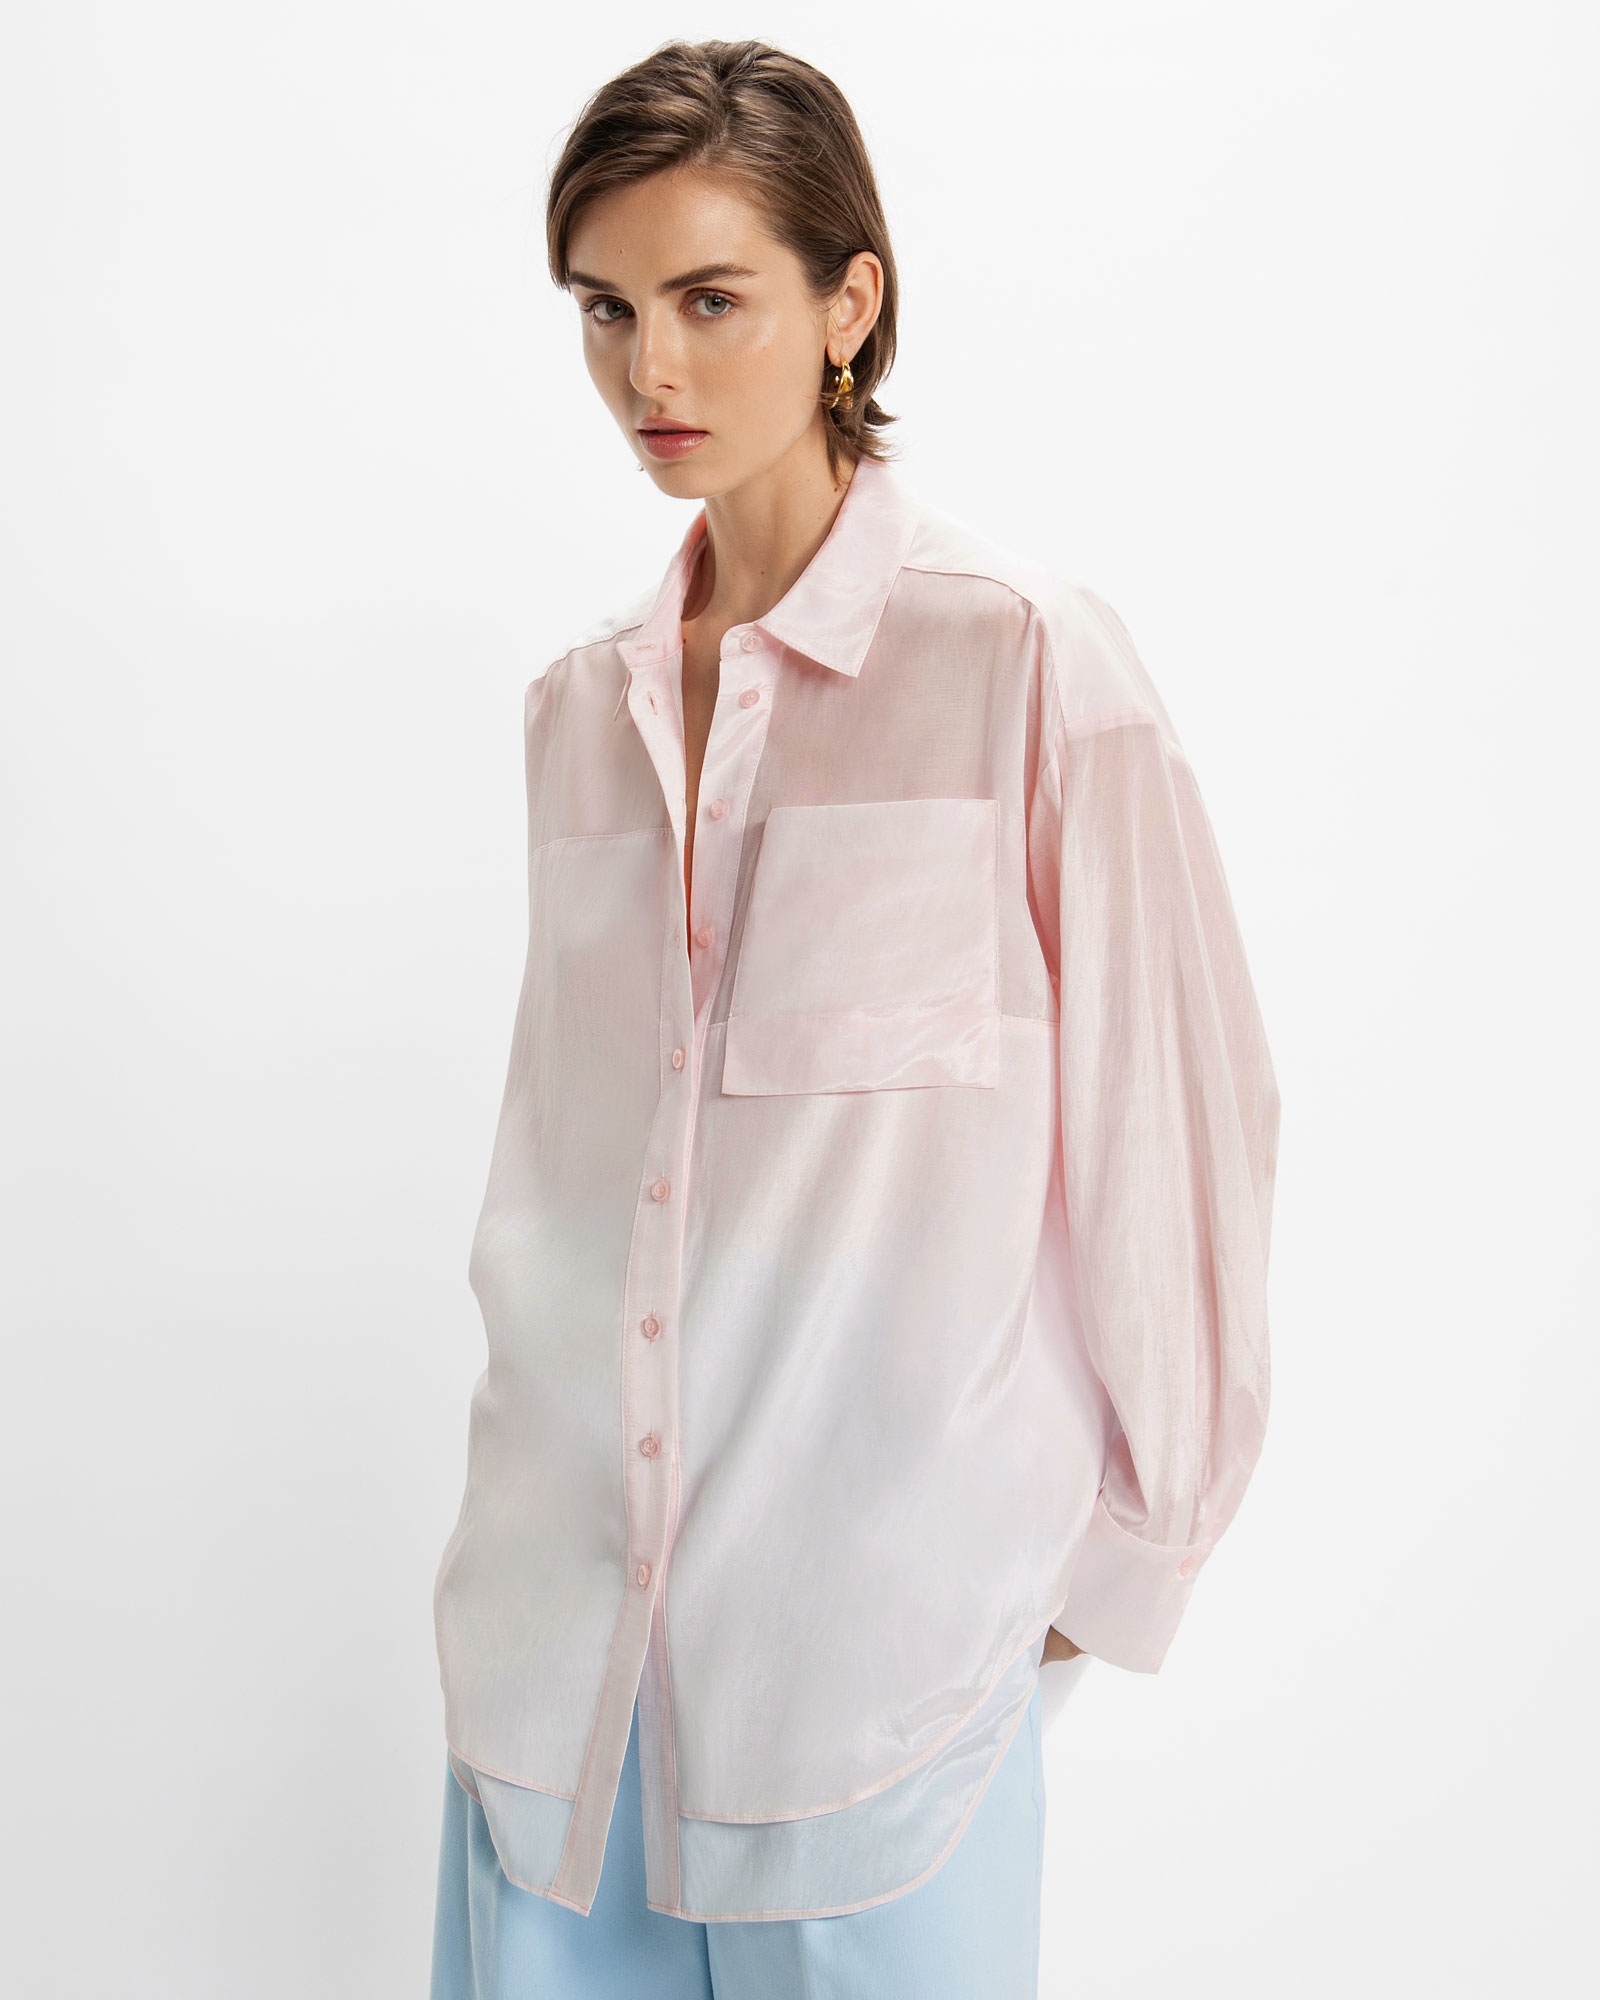 Multi Layer Shirt | Buy Tops and Shirts Online - Cue